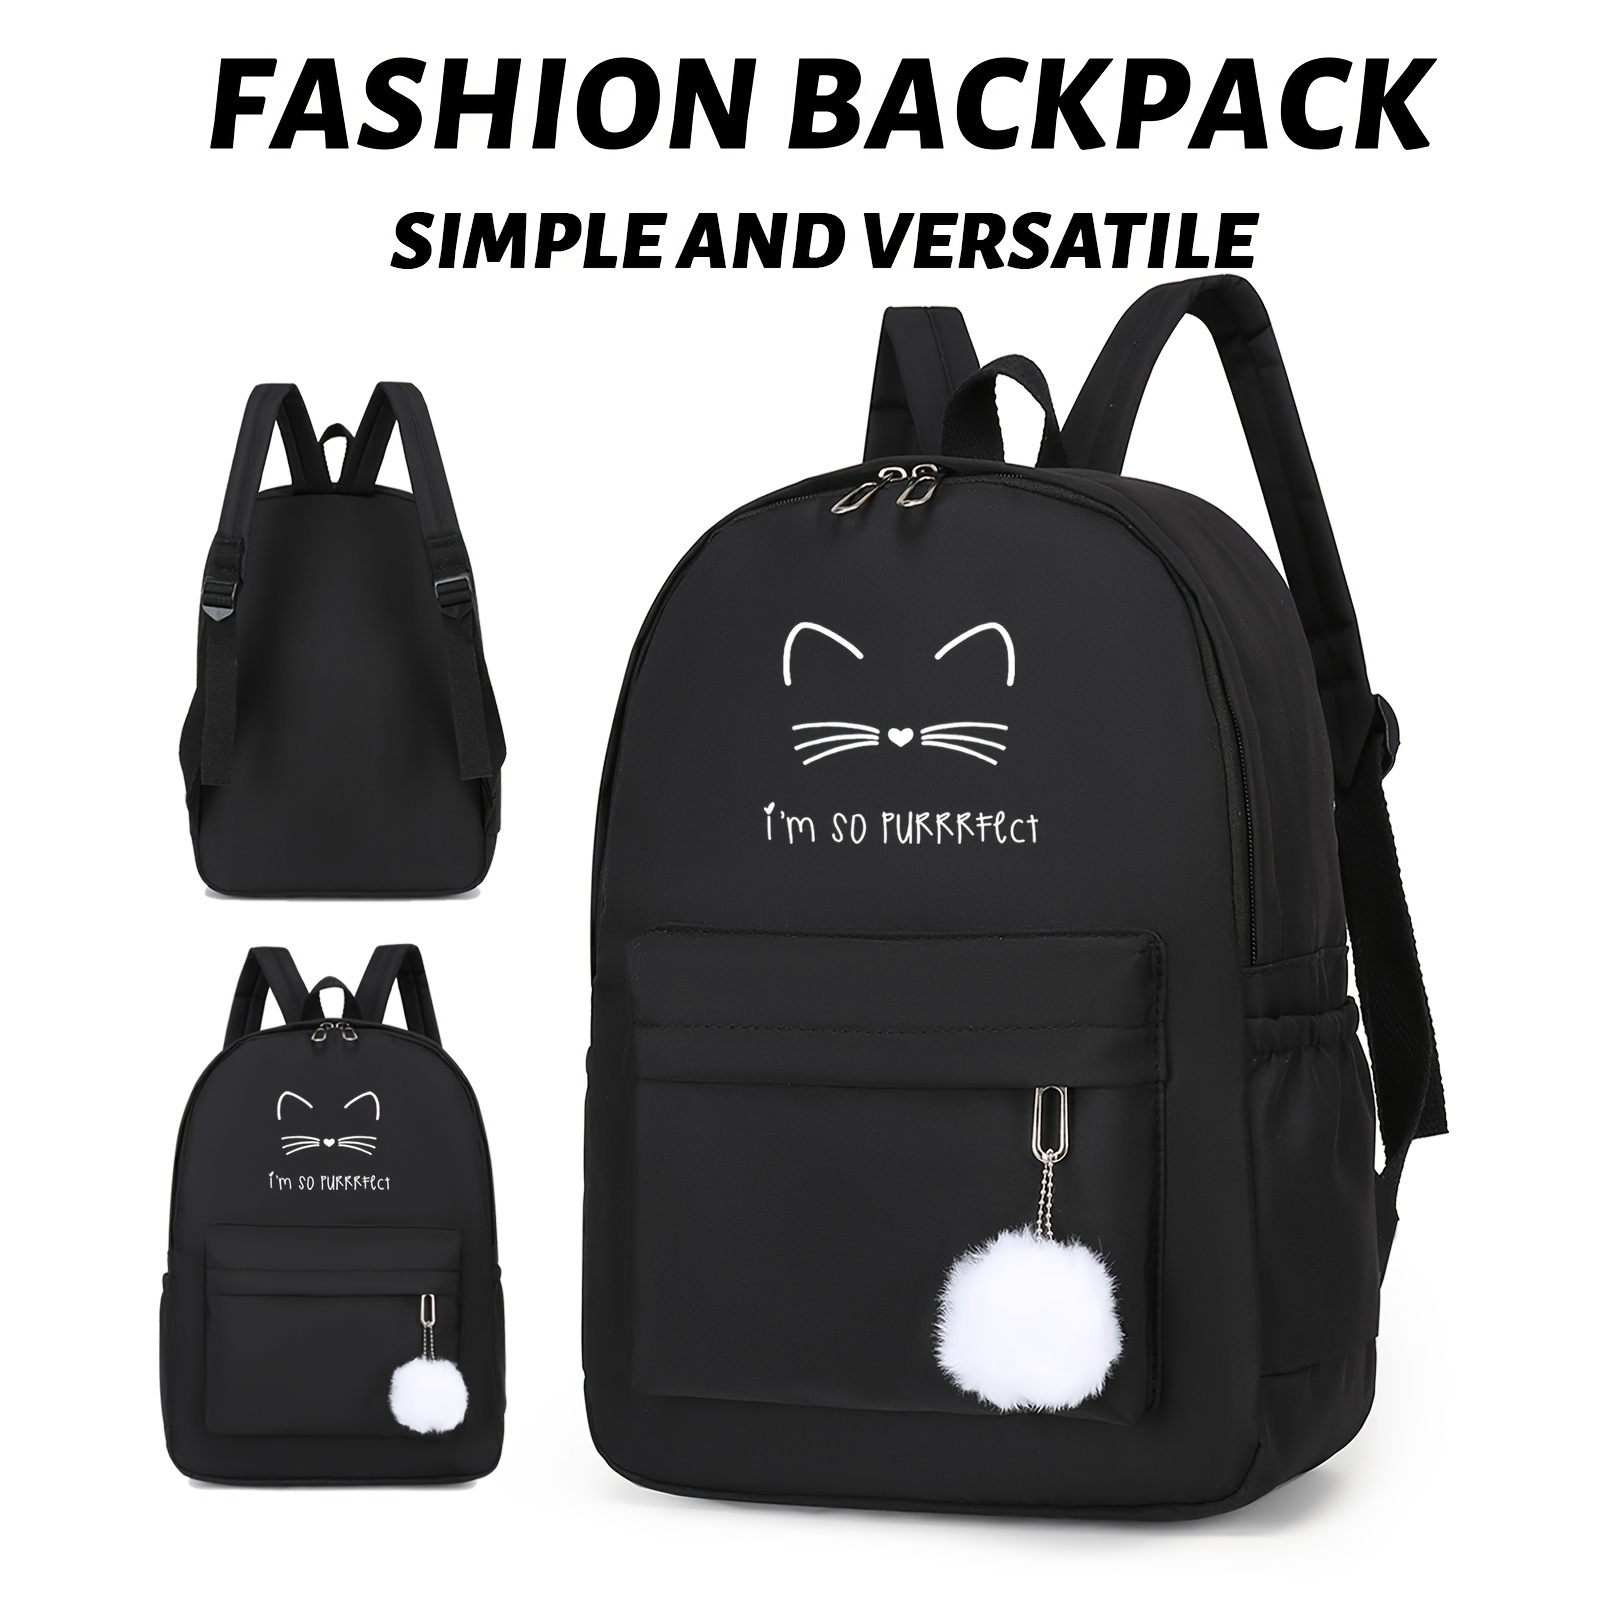 

Cat Letter Print Stylish And Versatile Black Backpack, Perfect For Travel With Its Large Capacity, Multi Functional Backpack, Suitable For Women And Men, Can Be Used For Various Purposes